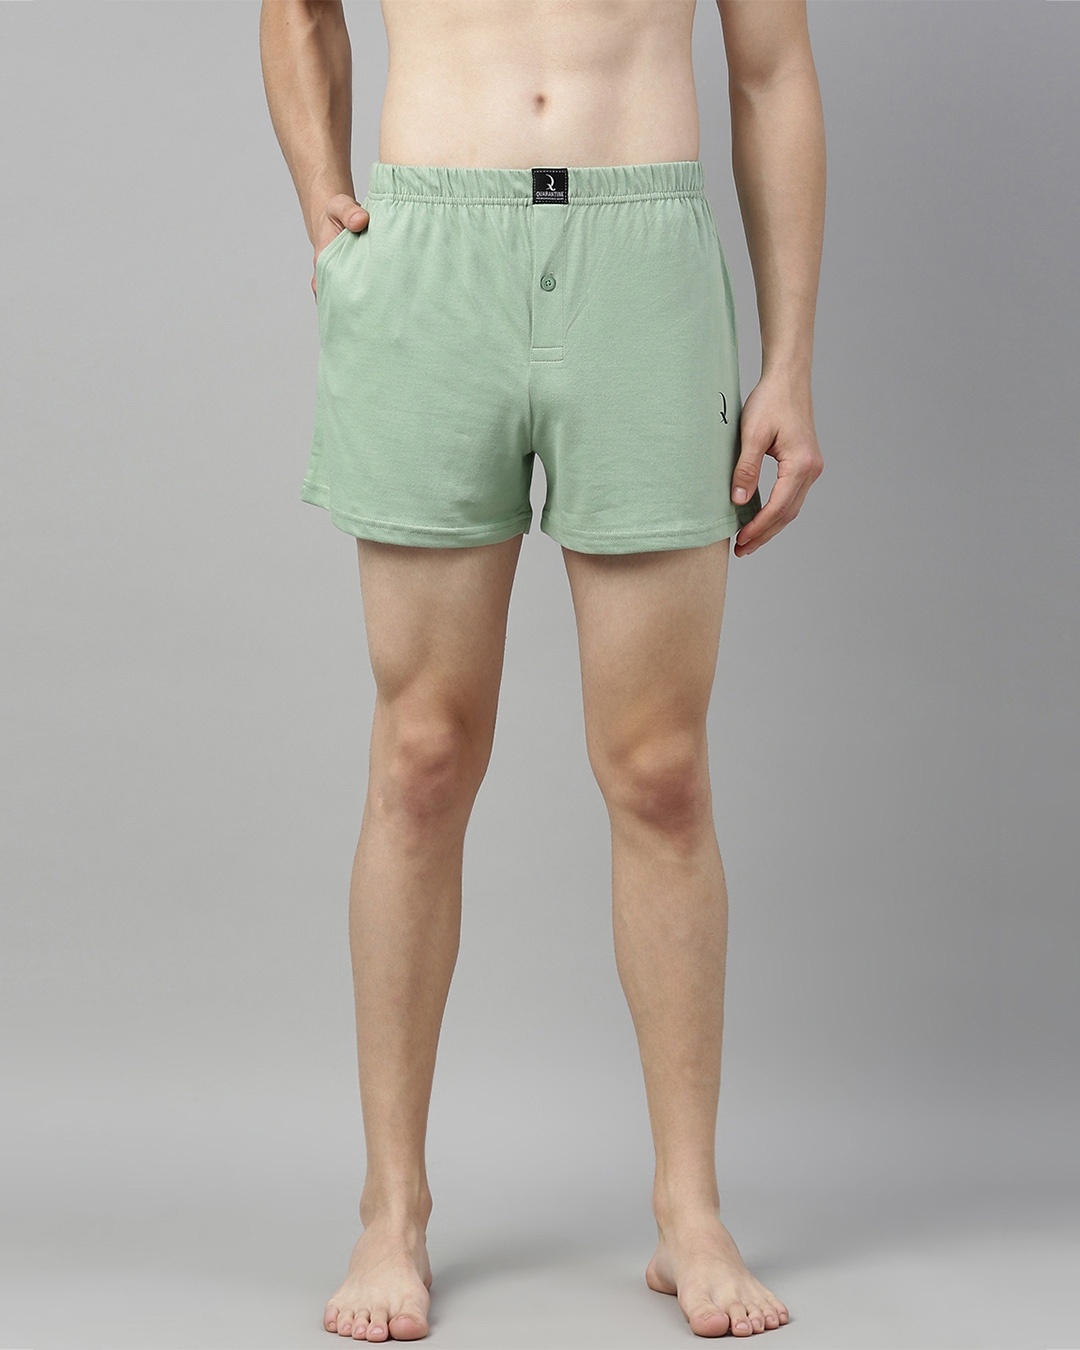 Shop Green Solid Boxer-Front